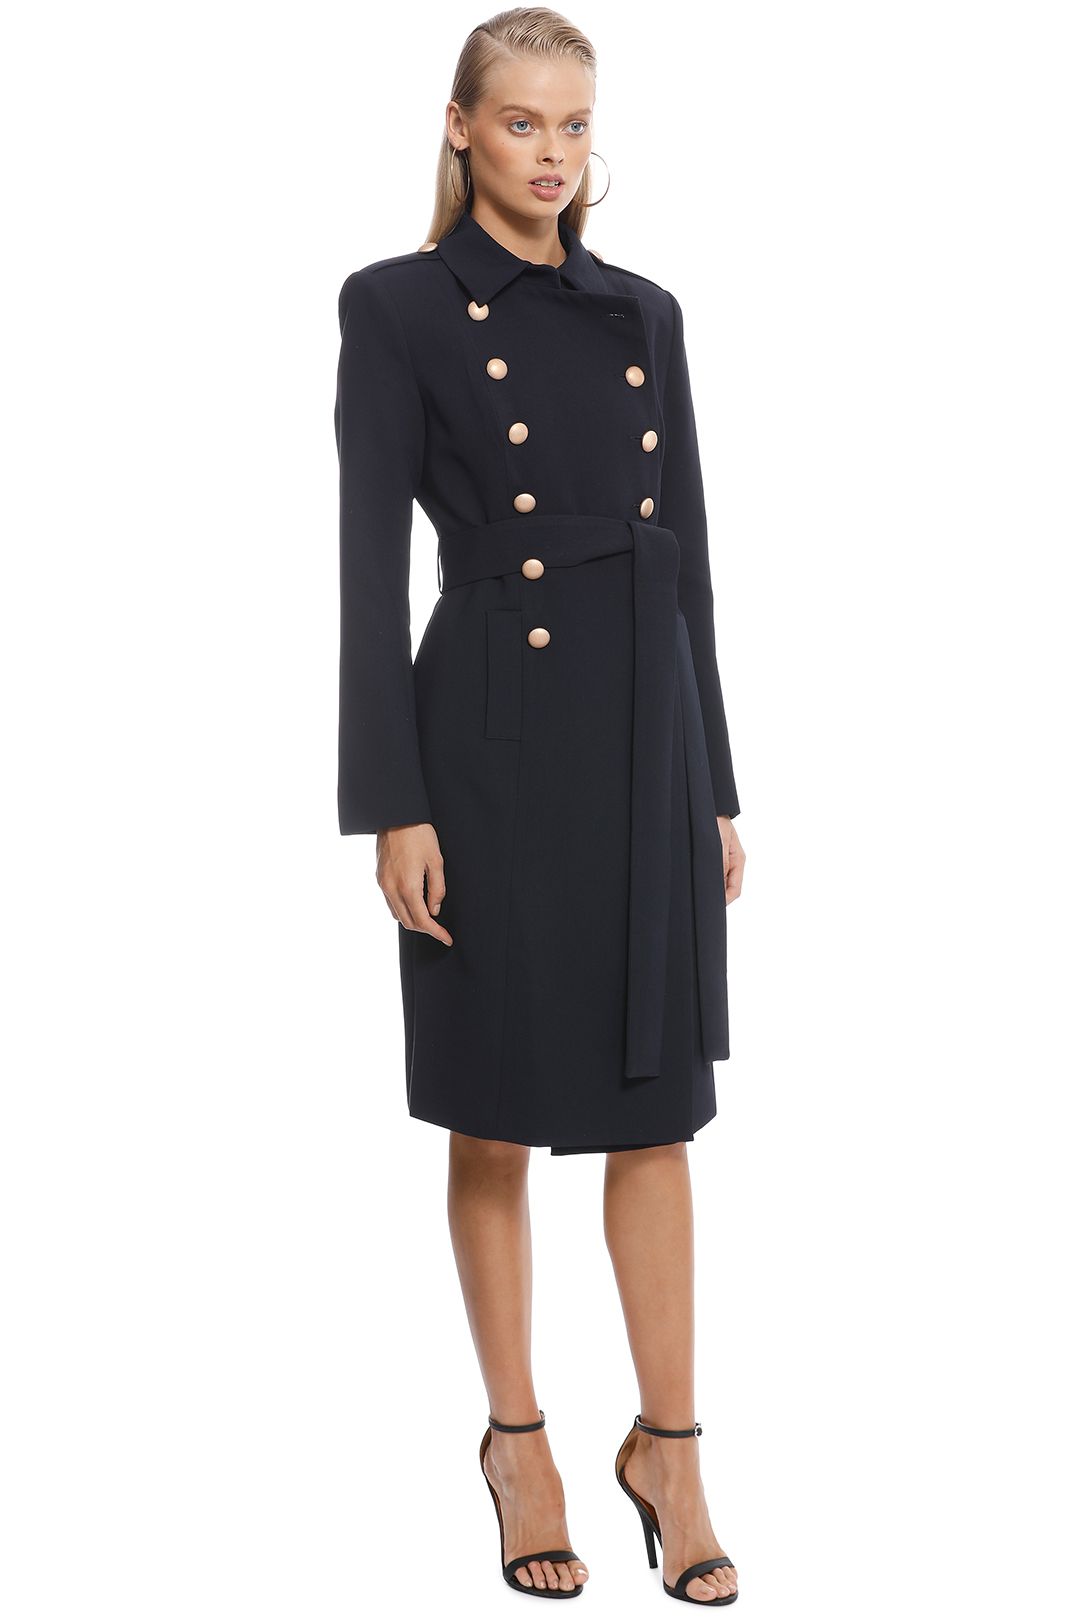 Misha Collection - Andrea Coat – Navy - Side